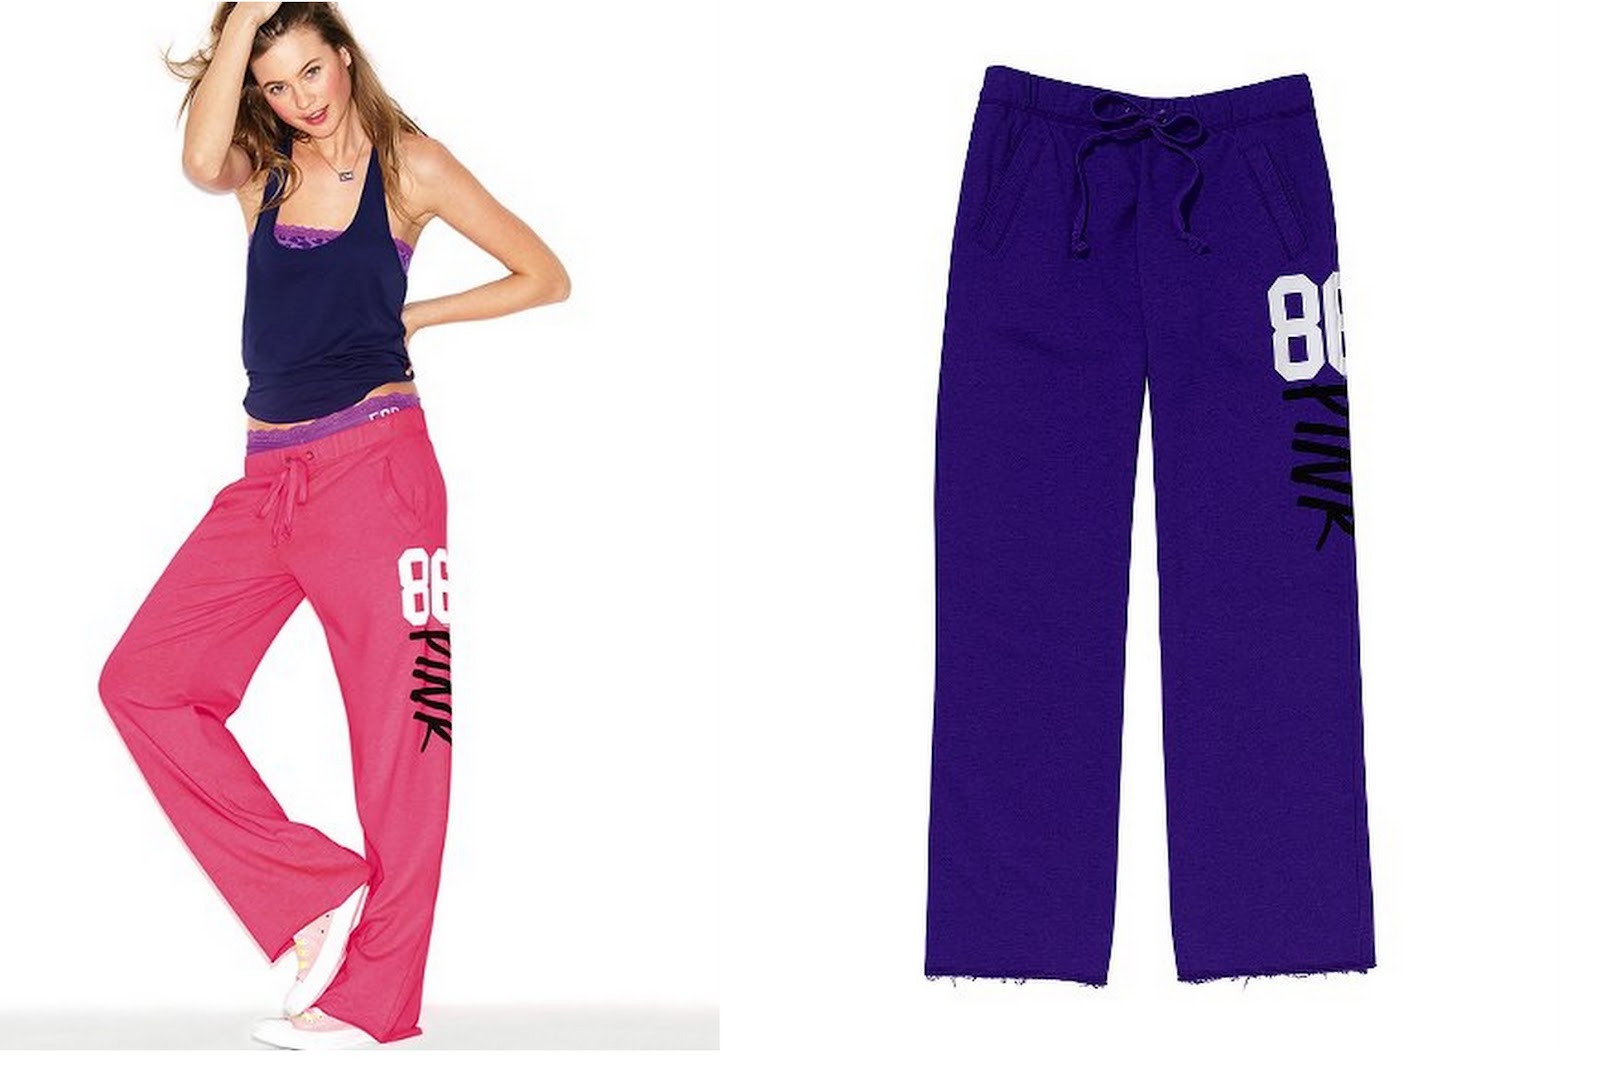 Pretty Cute and Outrageous: Love Pink Boyfriend Pant by Victoria's Secret!